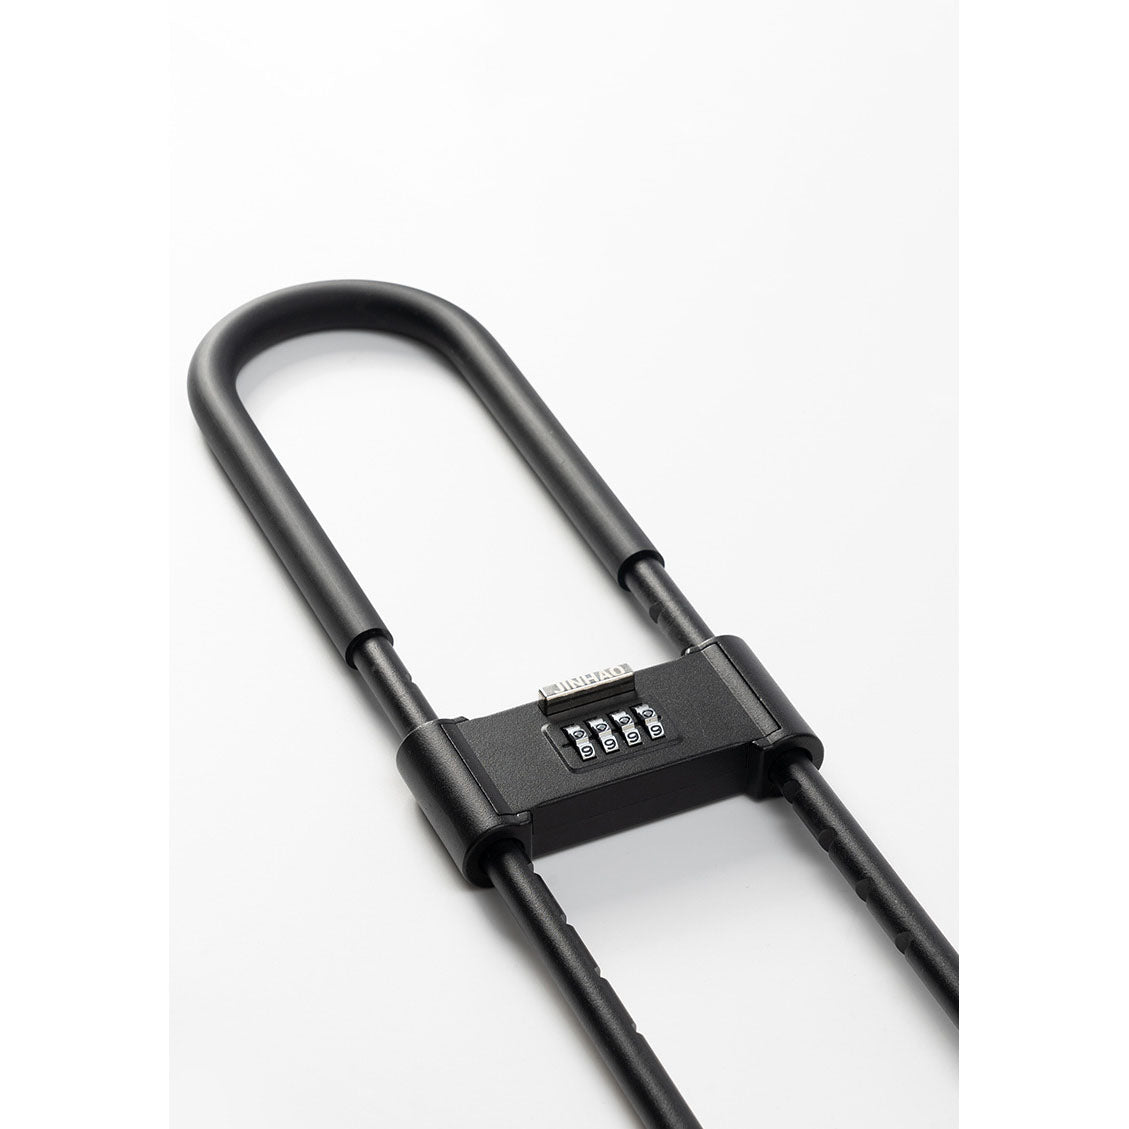 DS BS Anti Theft U-Shaped Lock with 4 Digits Code